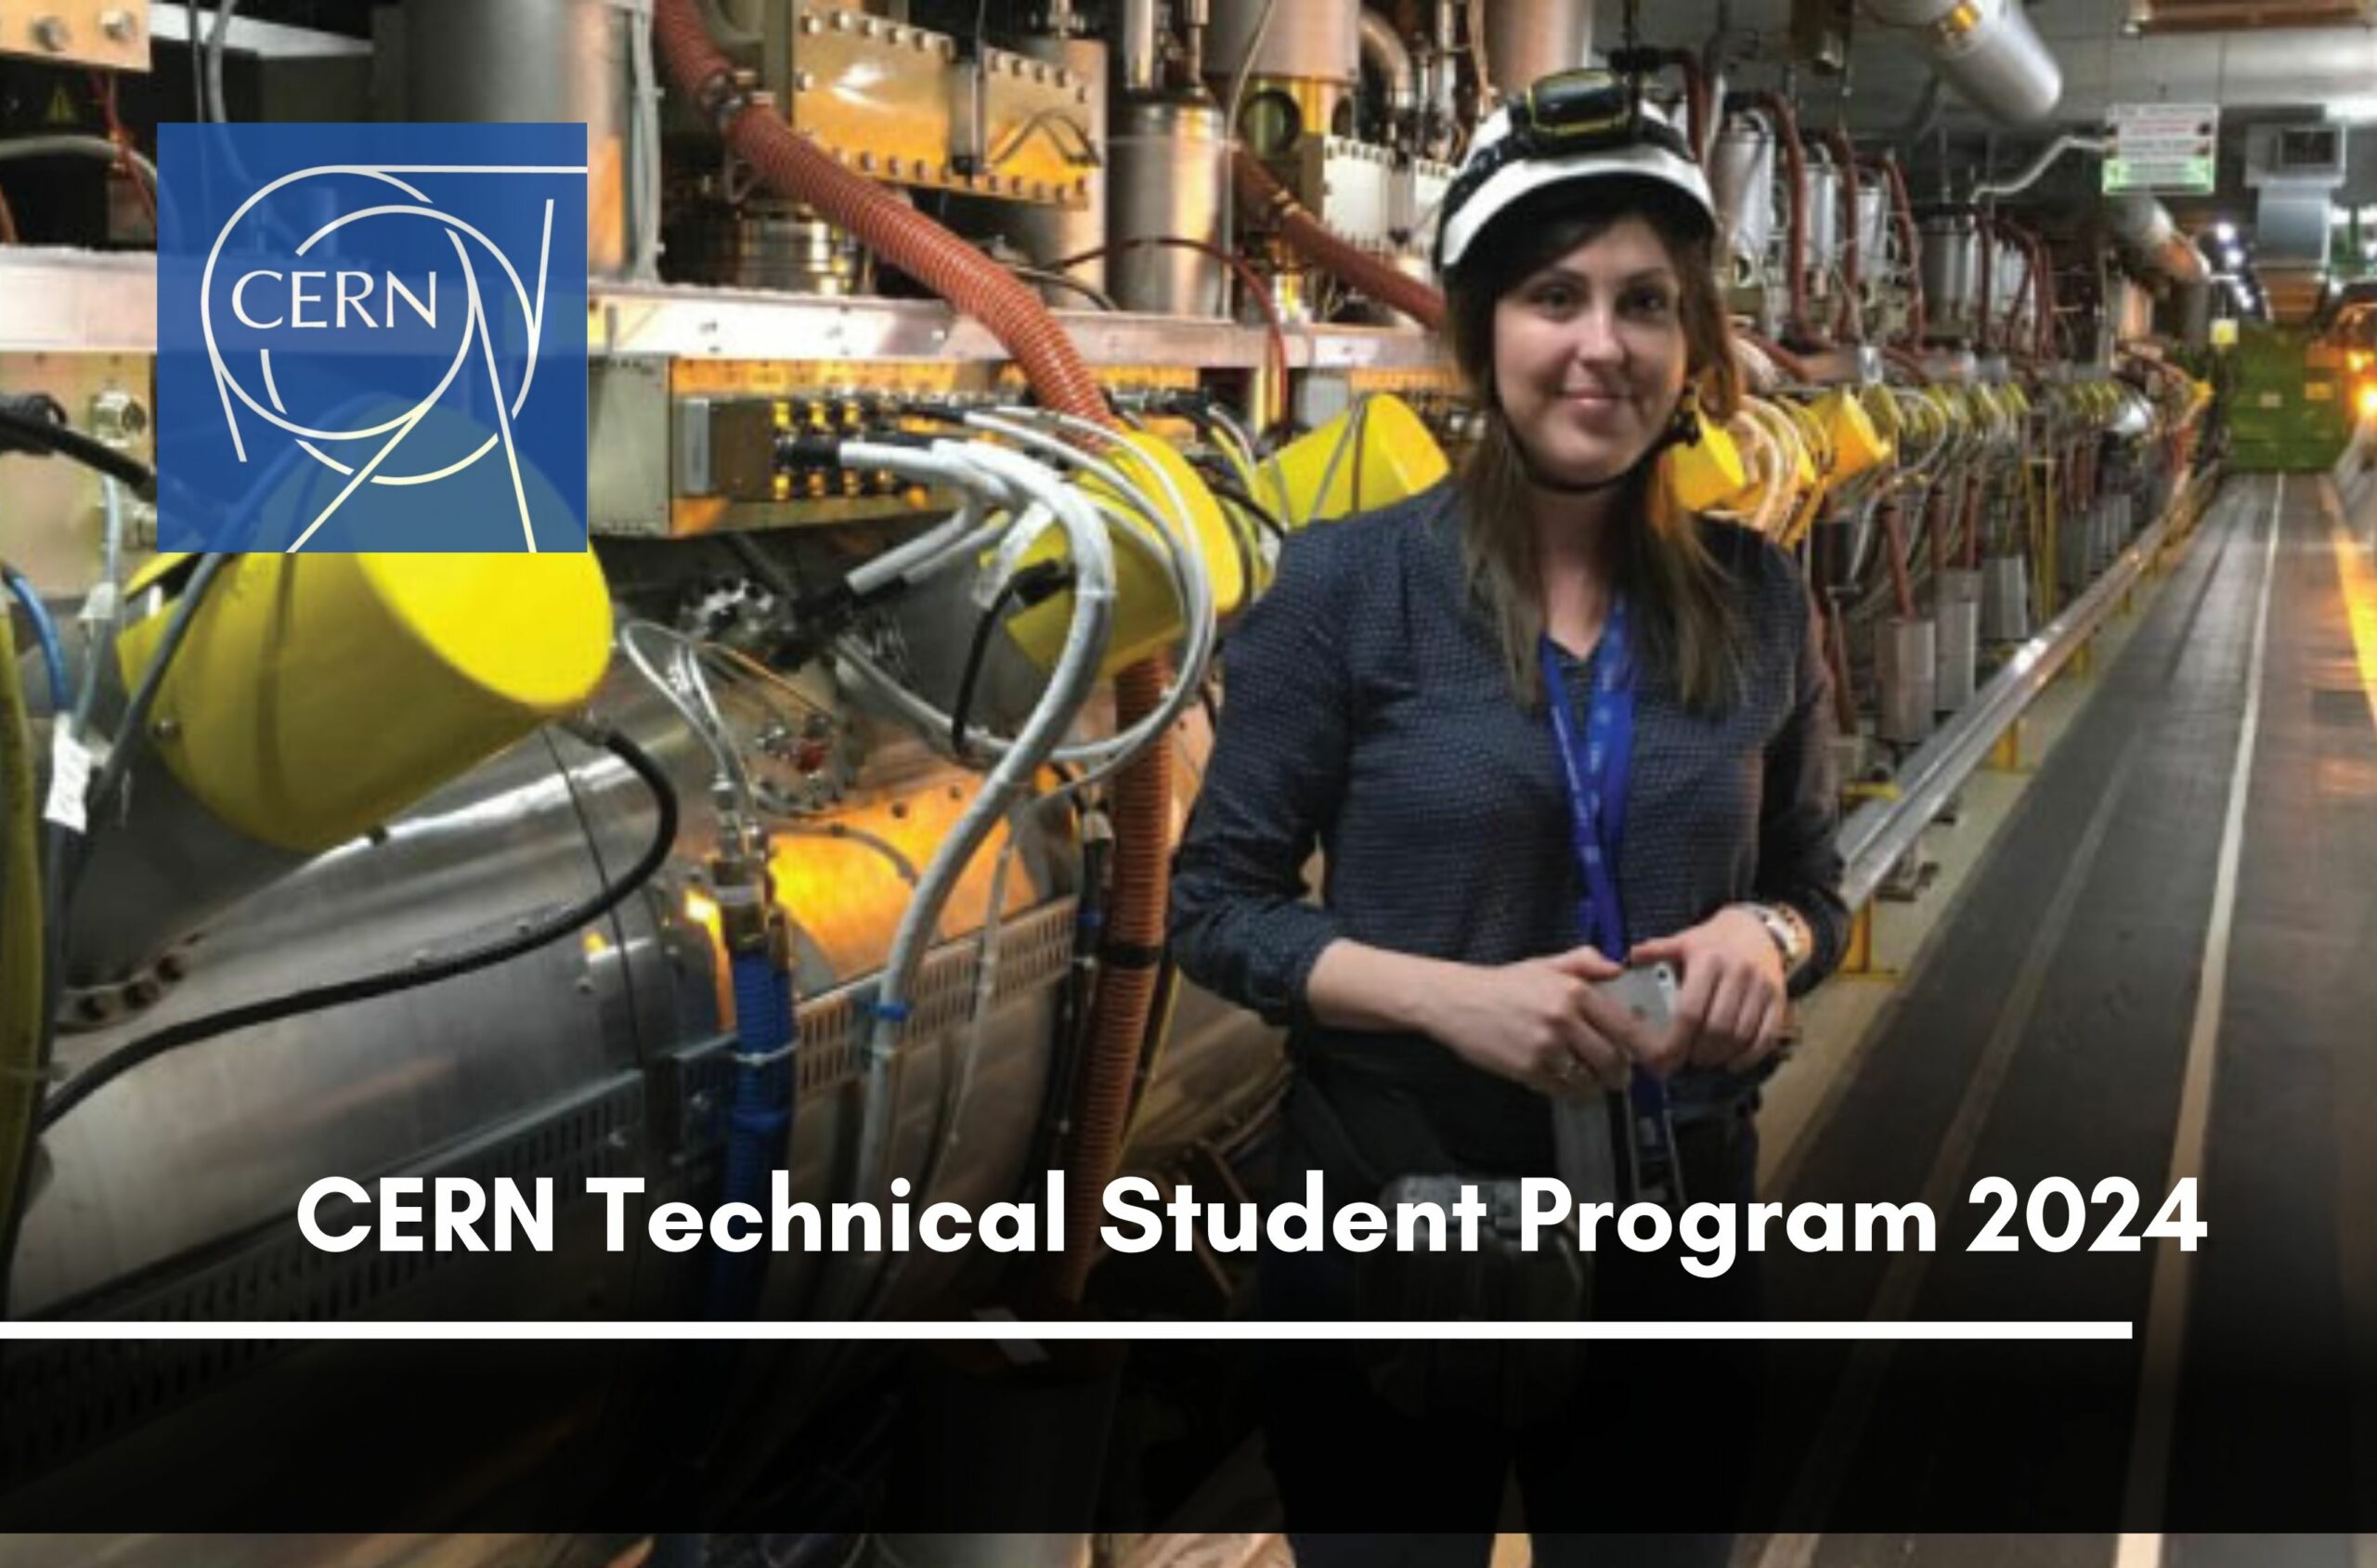 CERN Technical Student Program 2024 Youth Opportunities